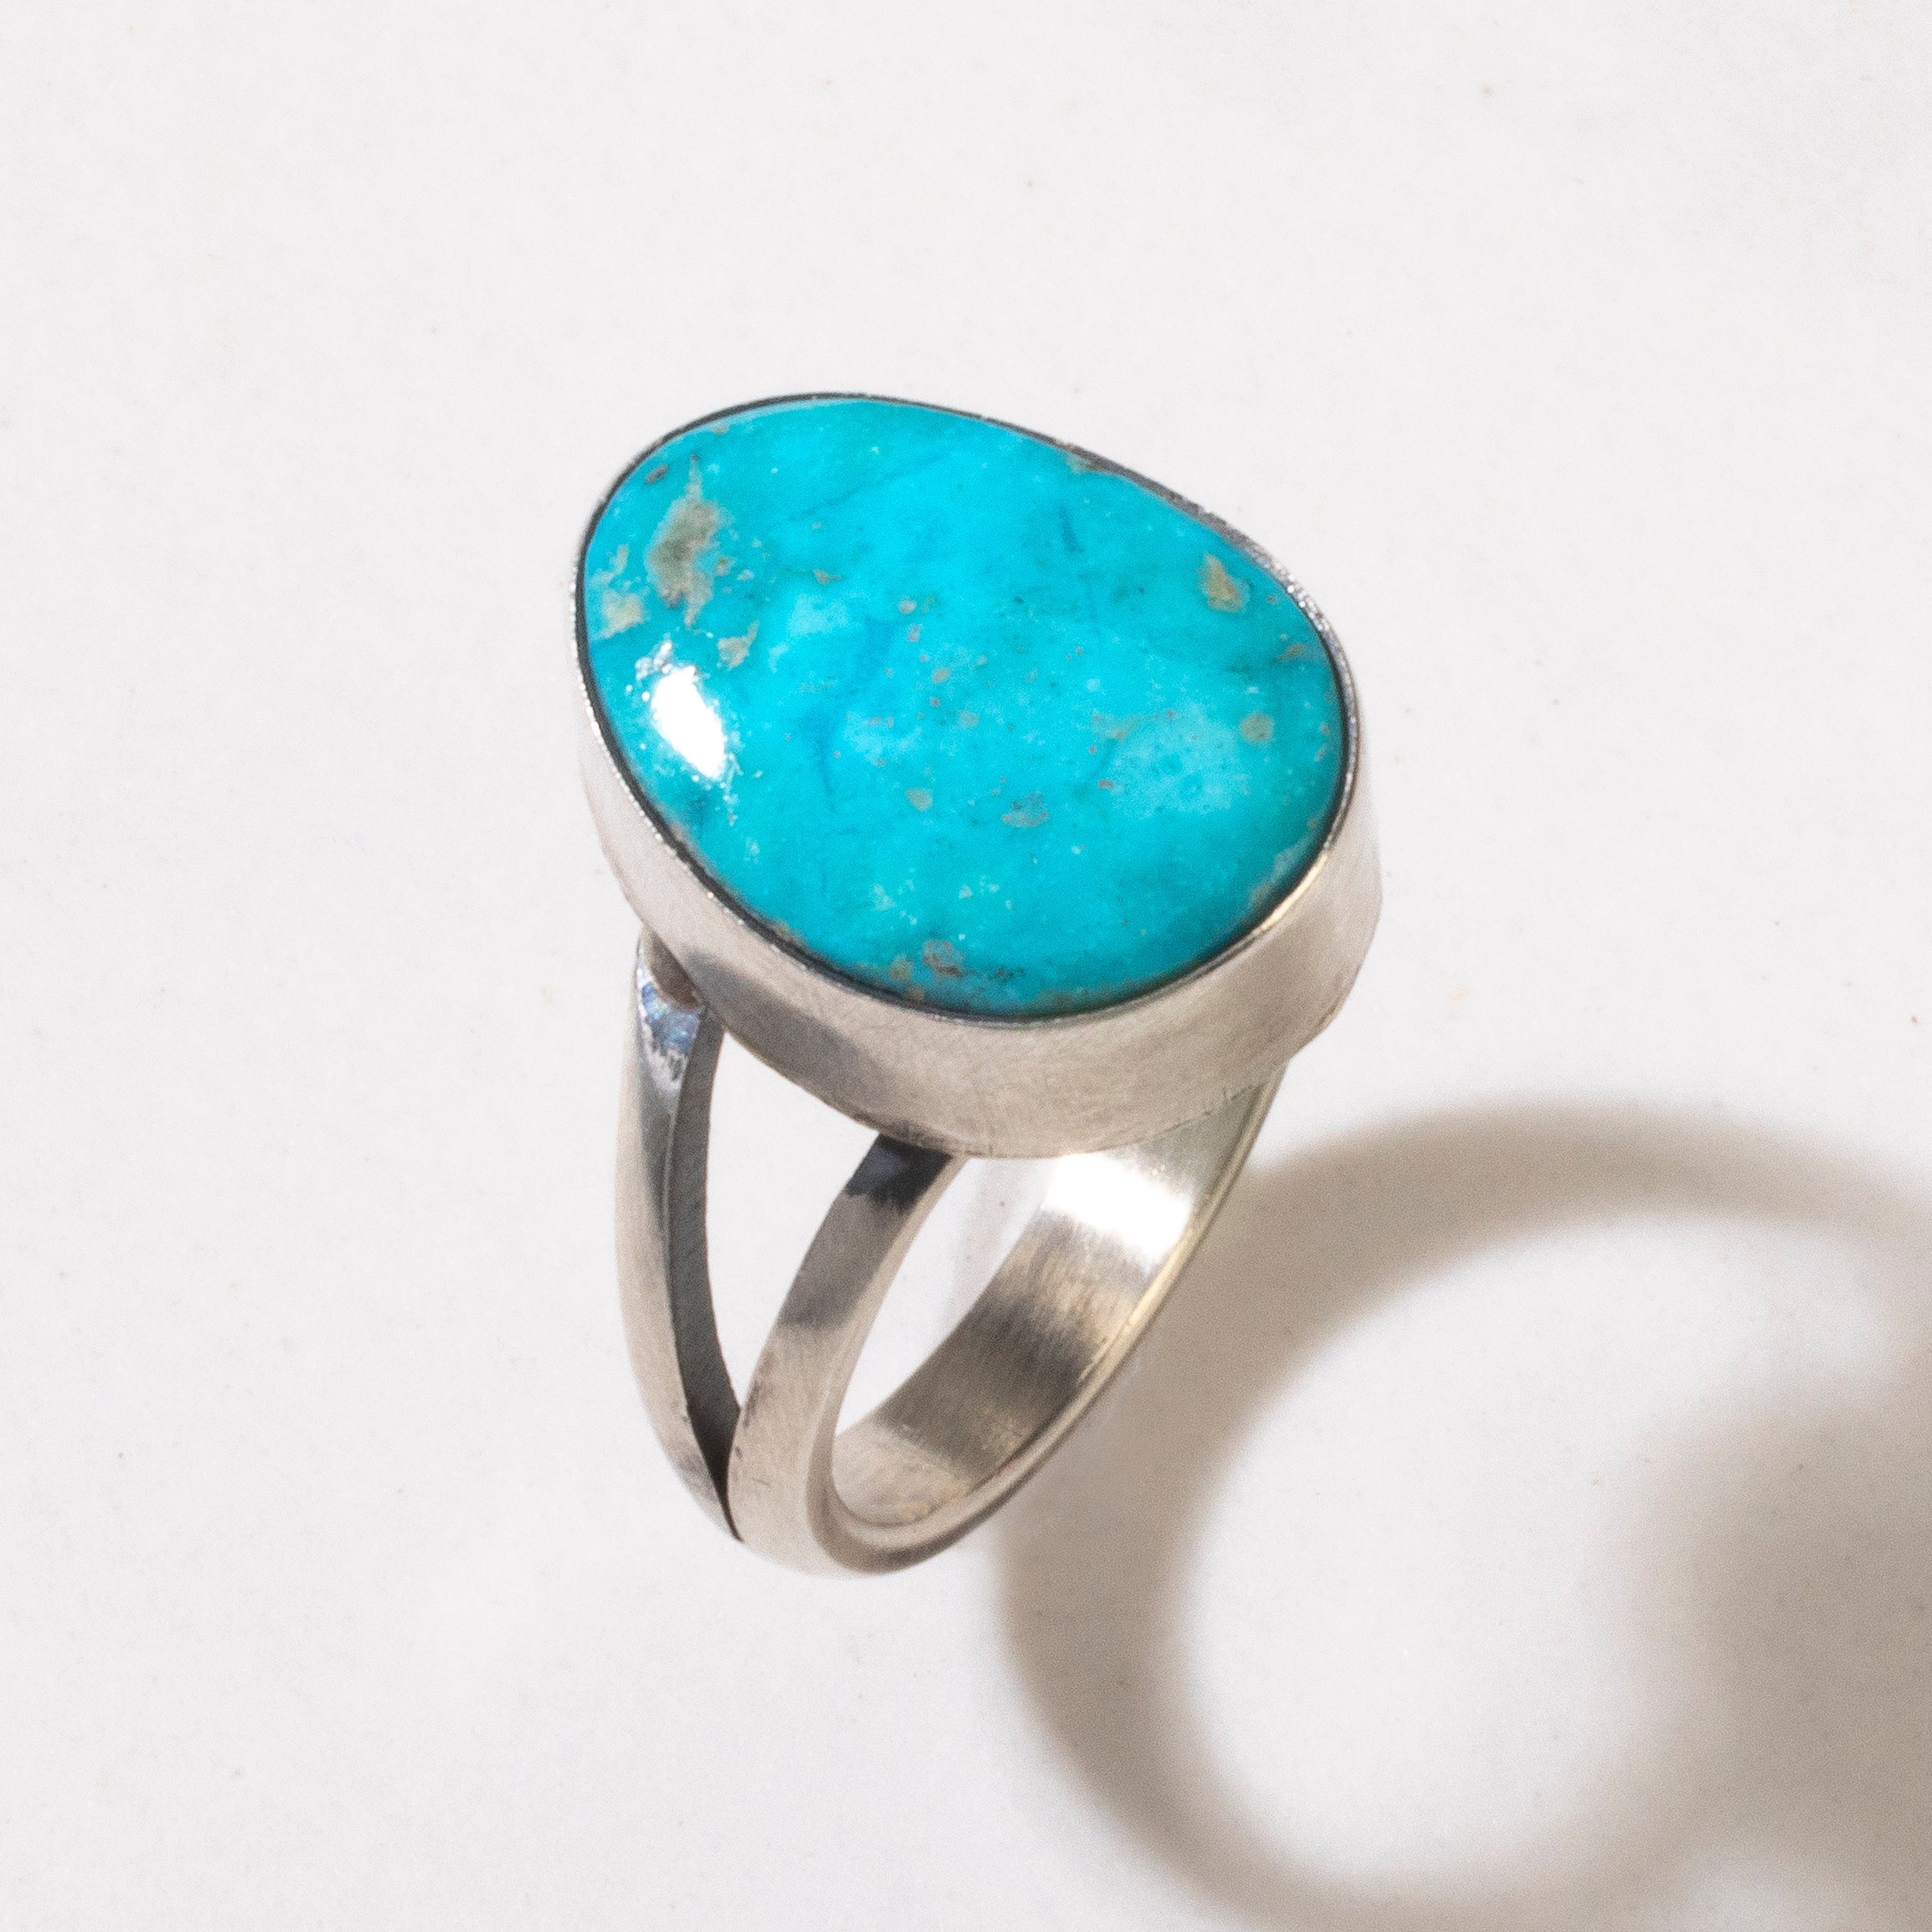 Kalifano Native American Jewelry 7 Scott Skeets Blue Ridge Turquoise USA Native American Made 925 Sterling Silver Ring NAR500.093.7